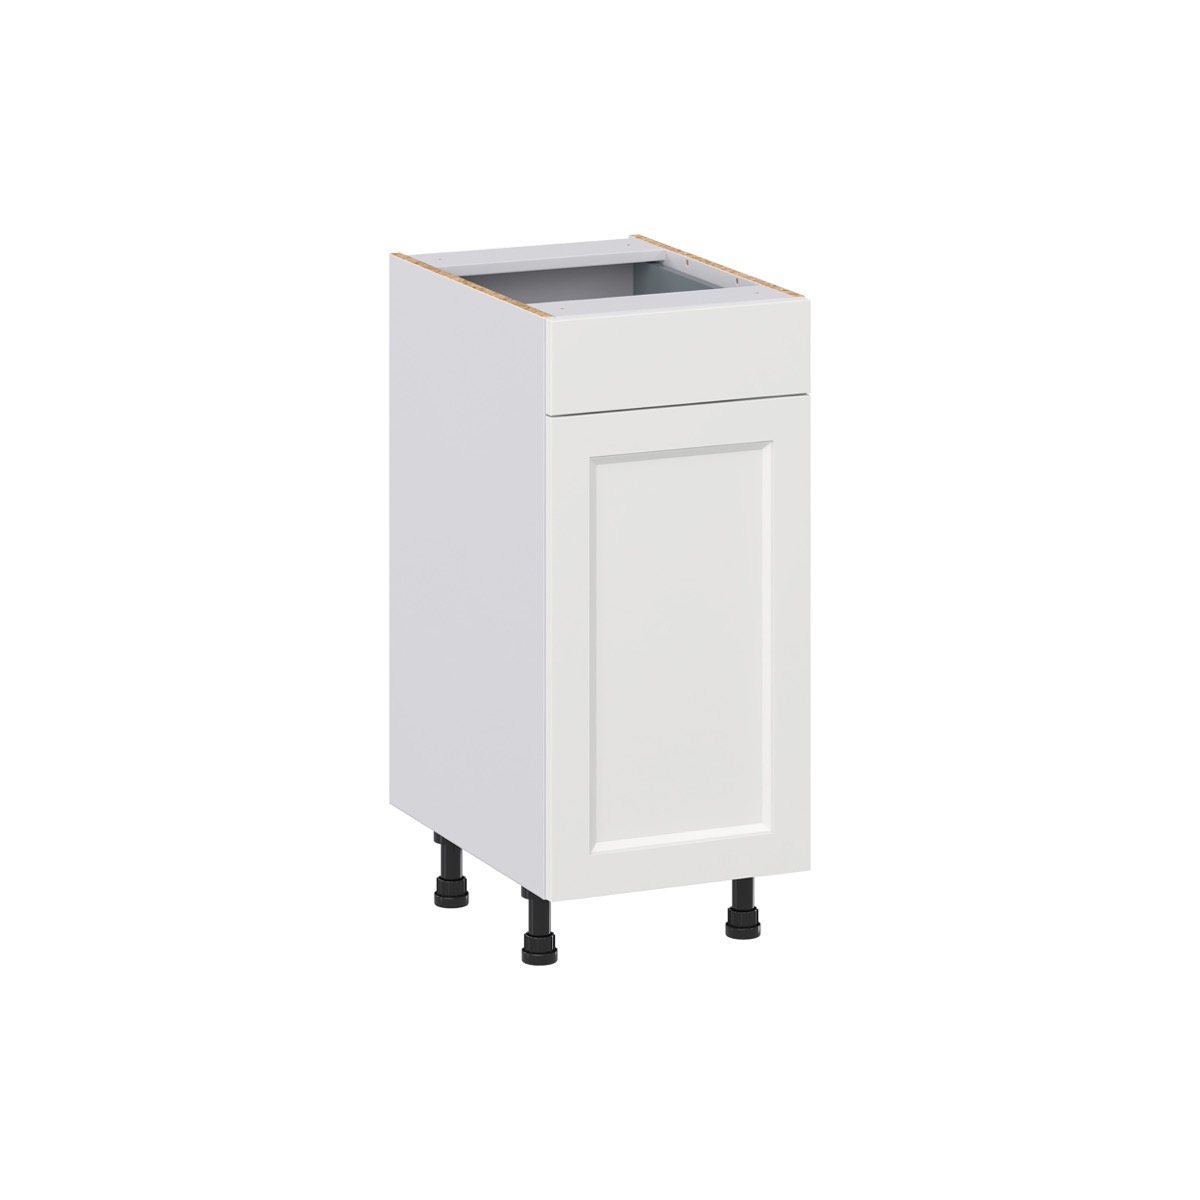 Alton Base Cabinet 15 .in W x 34.5 .in H x 21 .in D - J Collection